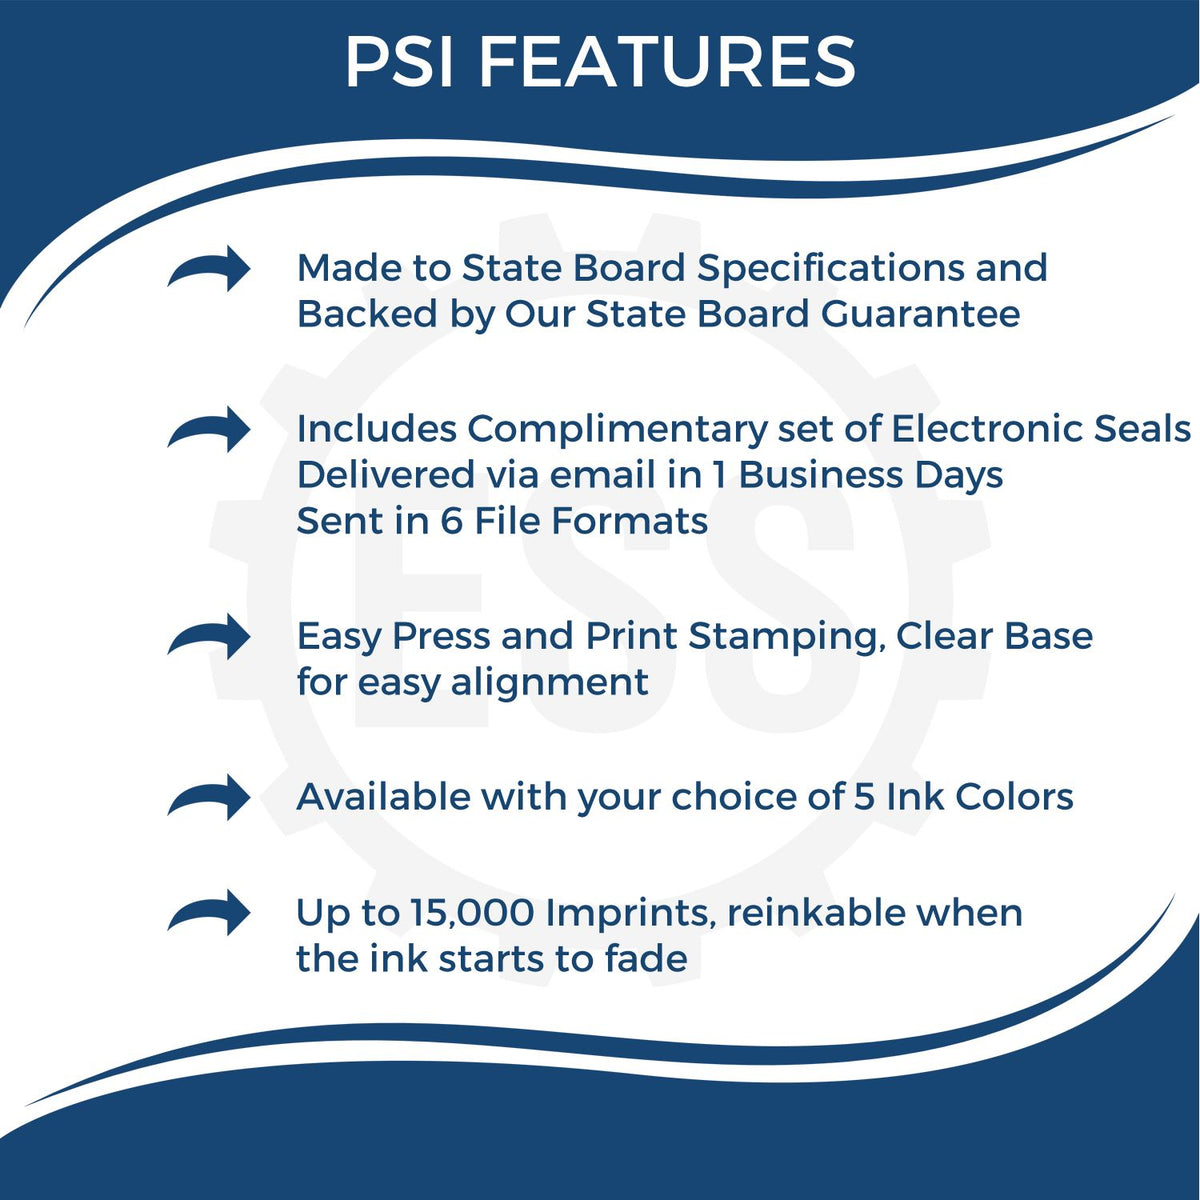 A picture of an infographic highlighting the selling points for the PSI South Carolina Notary Stamp